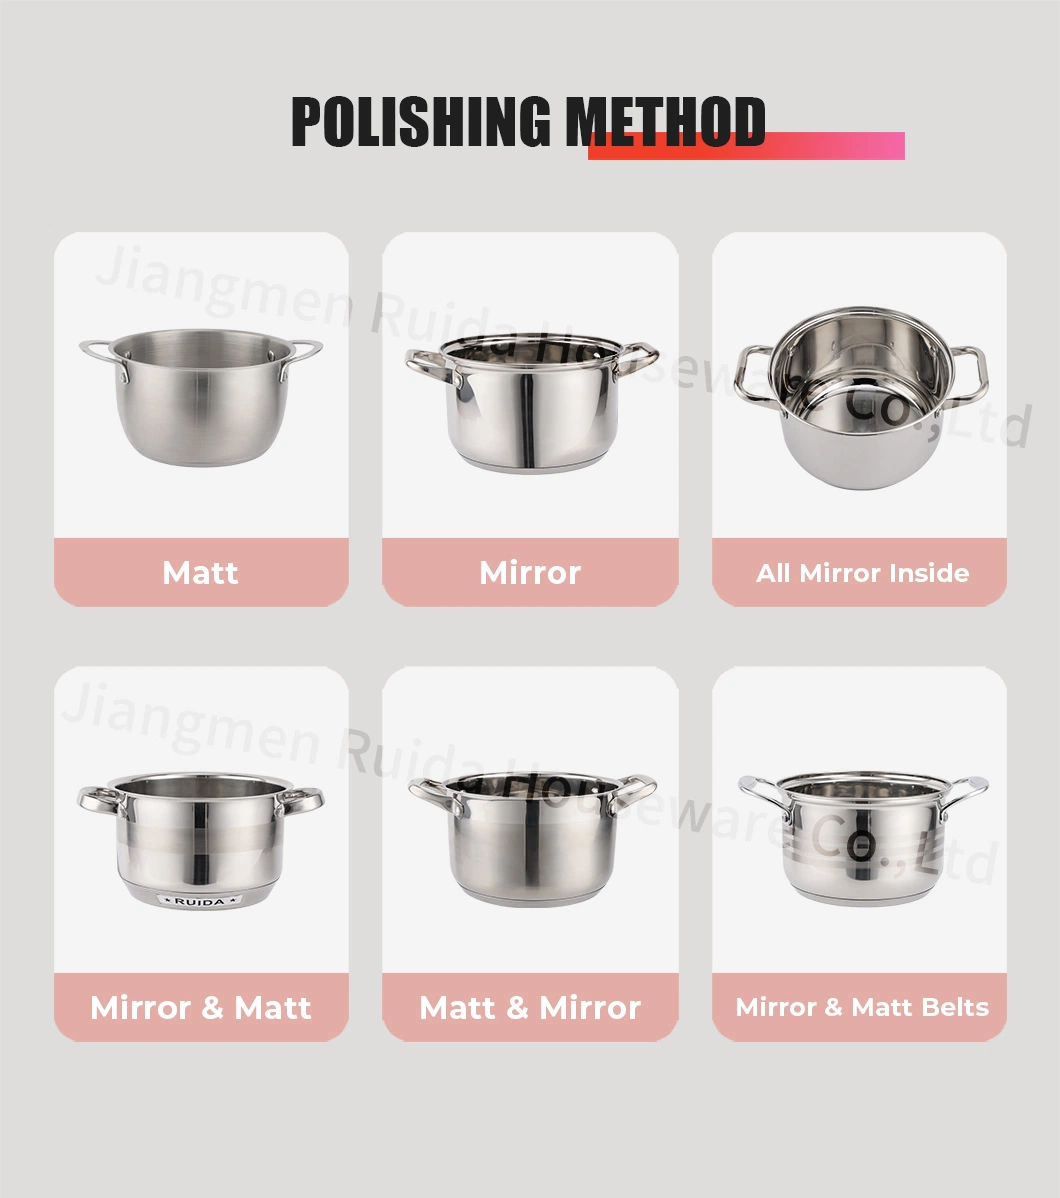 Customized Kitchen Appliance Blue Silicone 6/8/10/12PCS Stainless Steel Kitchenware Set Cookware